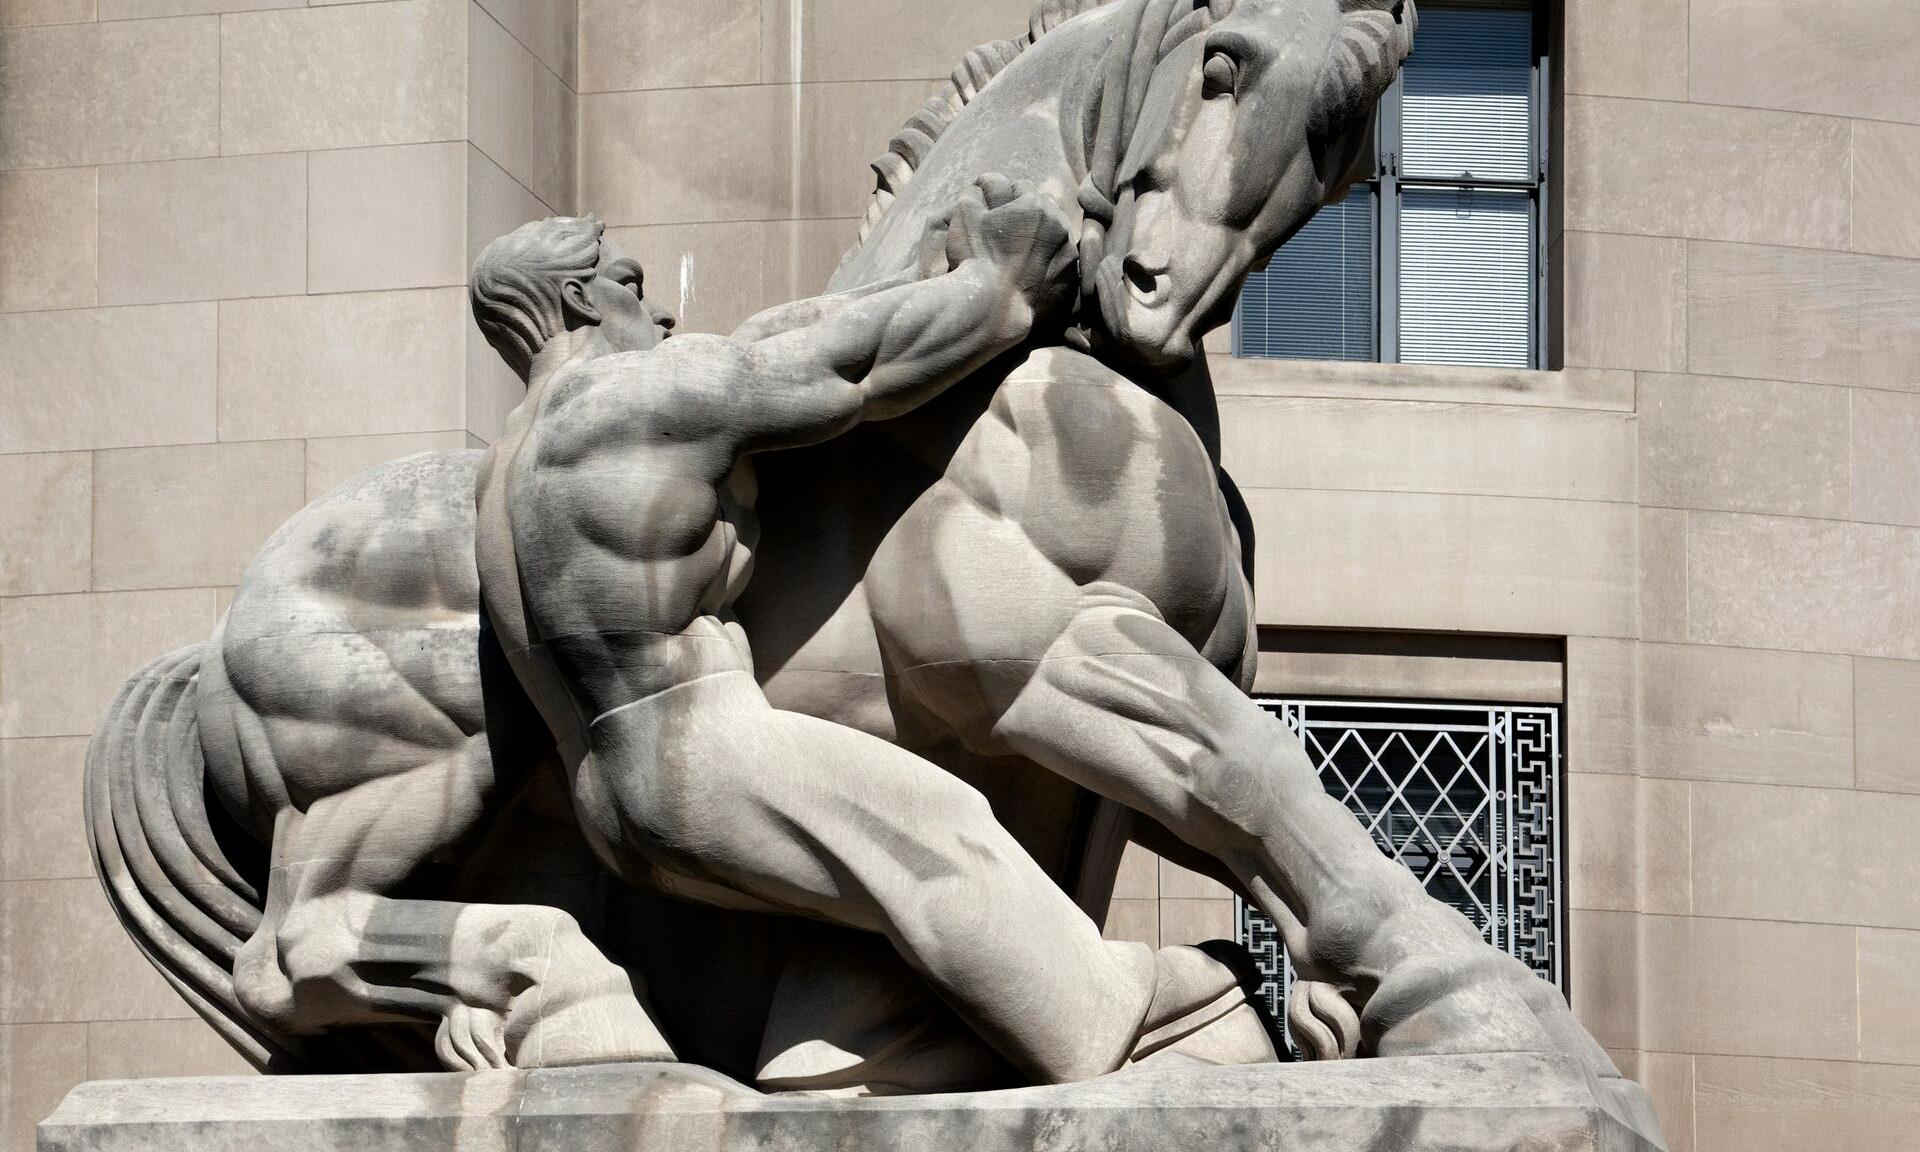 (&#8220;One is Man Controlling Trade,&#8221; 1942 statue by Michael Lantz, at Federal Trade Commission, 600 Pennsylvania Ave., NW Washington, D.C )